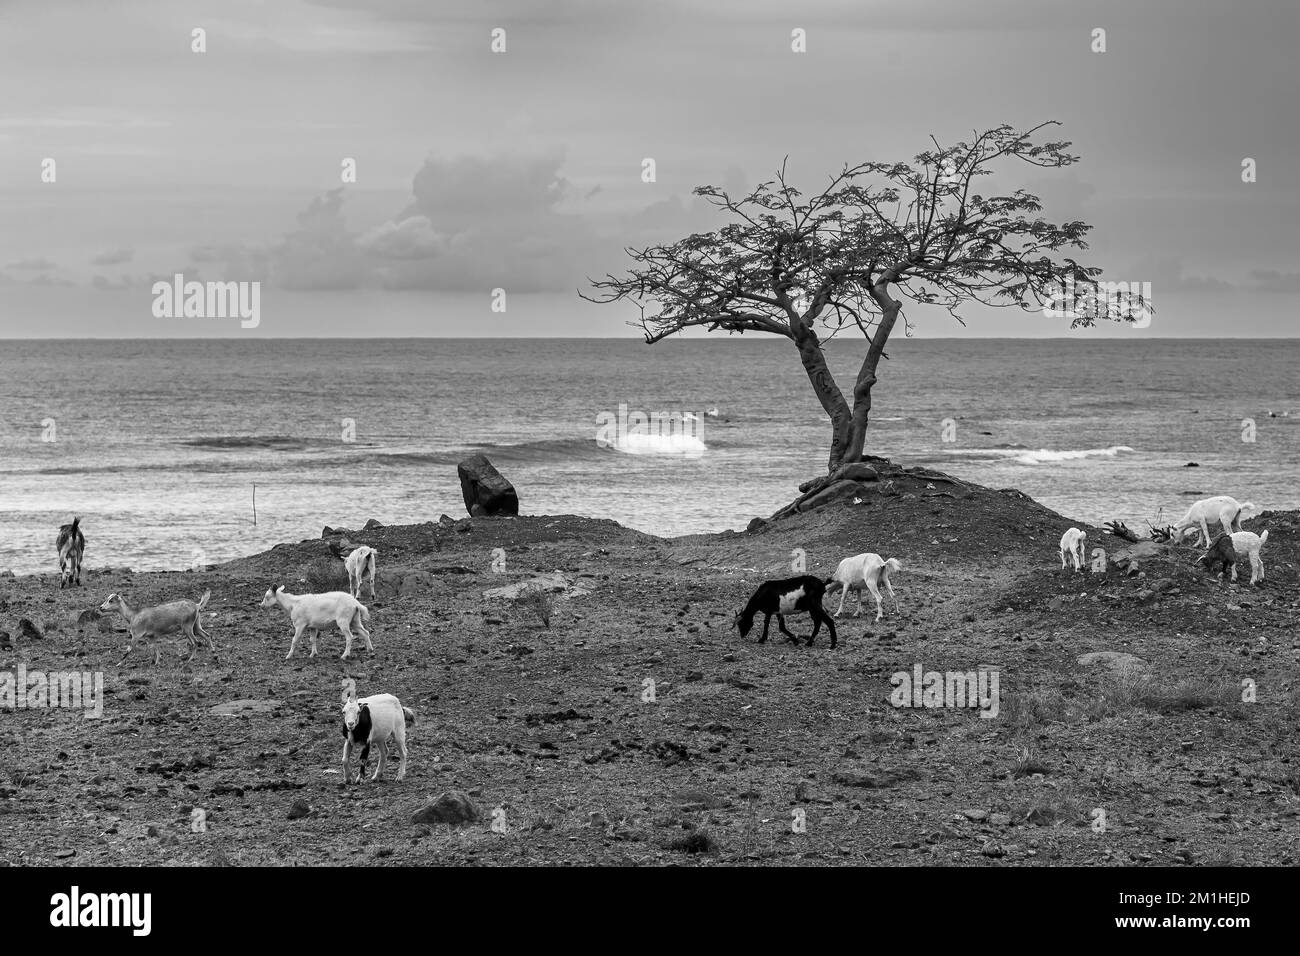 A herd of goats wandering around the rocky coast in Cuba, with a lonely acacia tree and seascape in the background, in grayscale Stock Photo